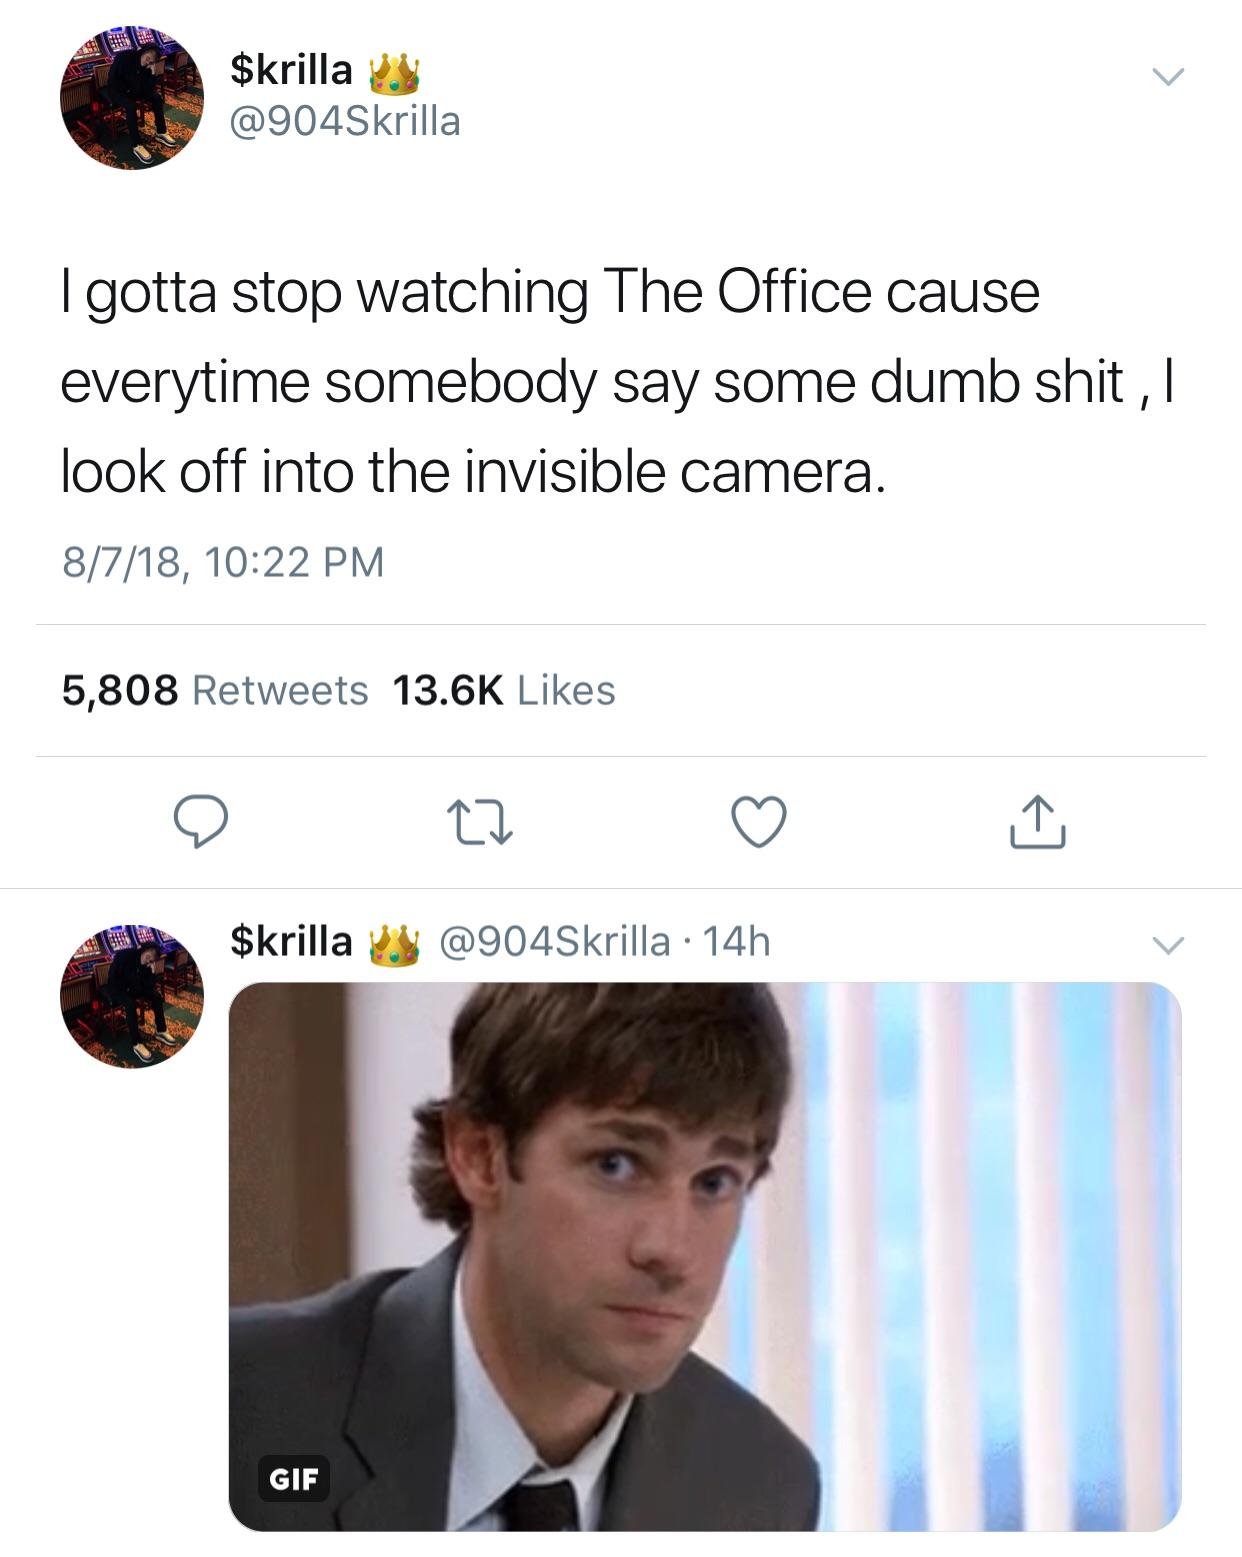 The Office is life